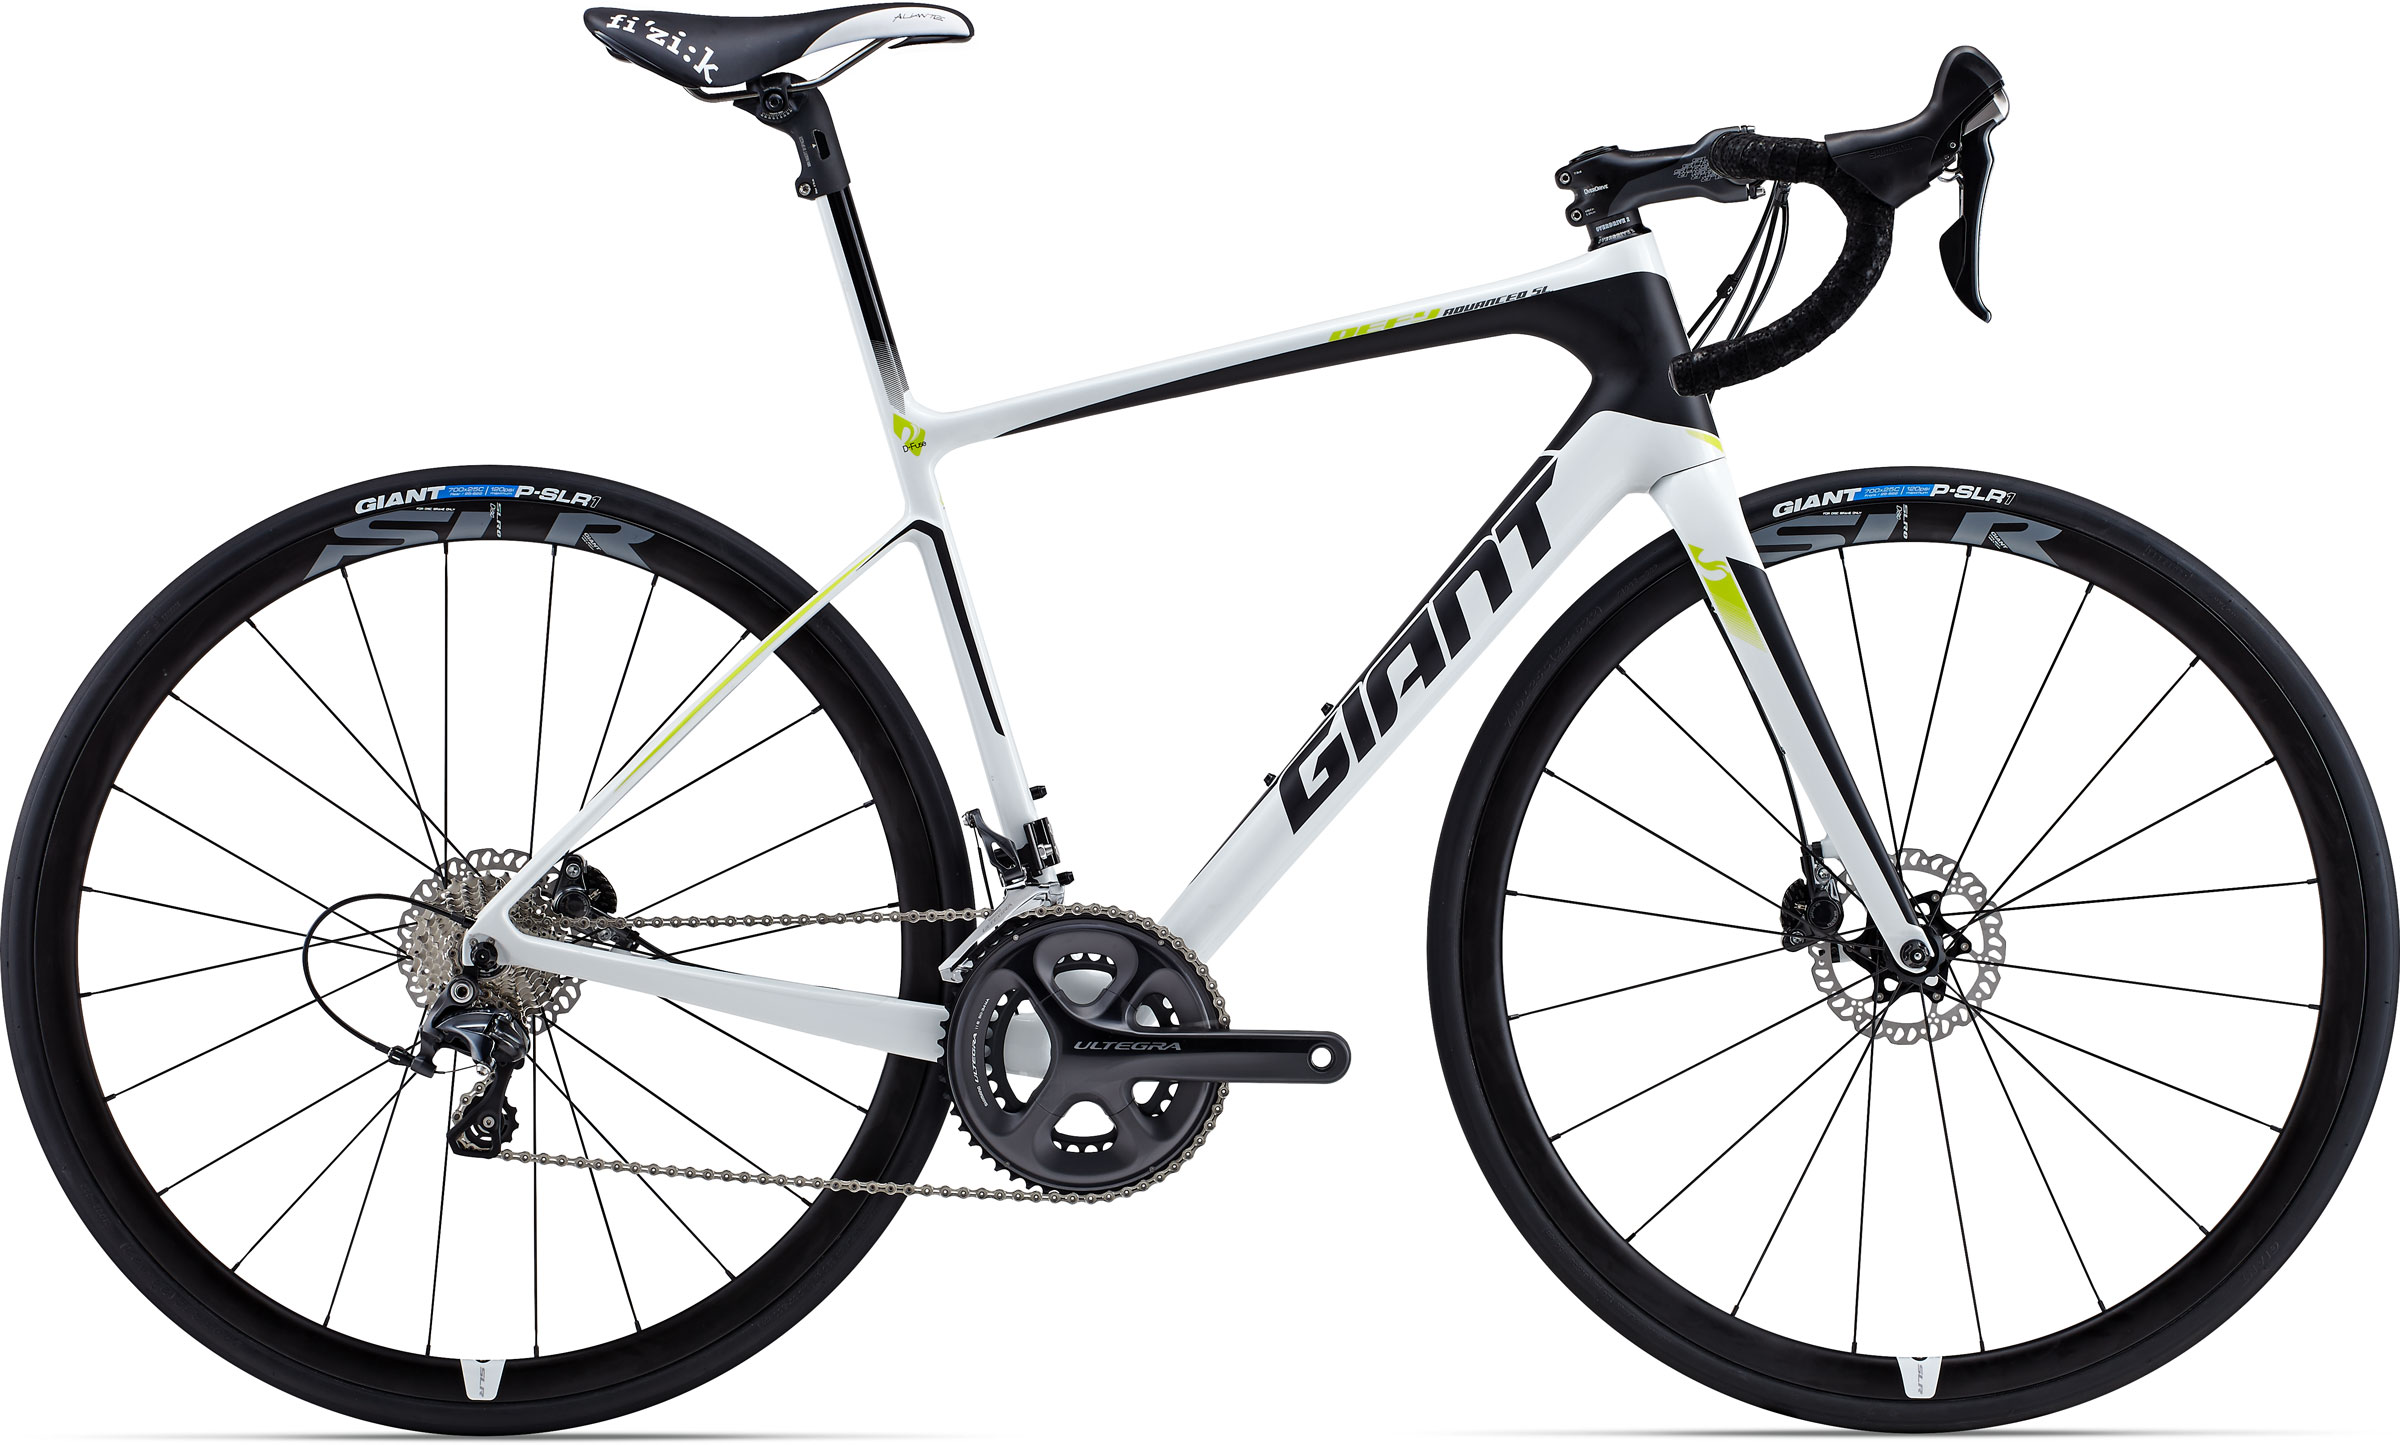 15 Giant Defy Advanced Sl 1 Bicycle Details Bicyclebluebook Com